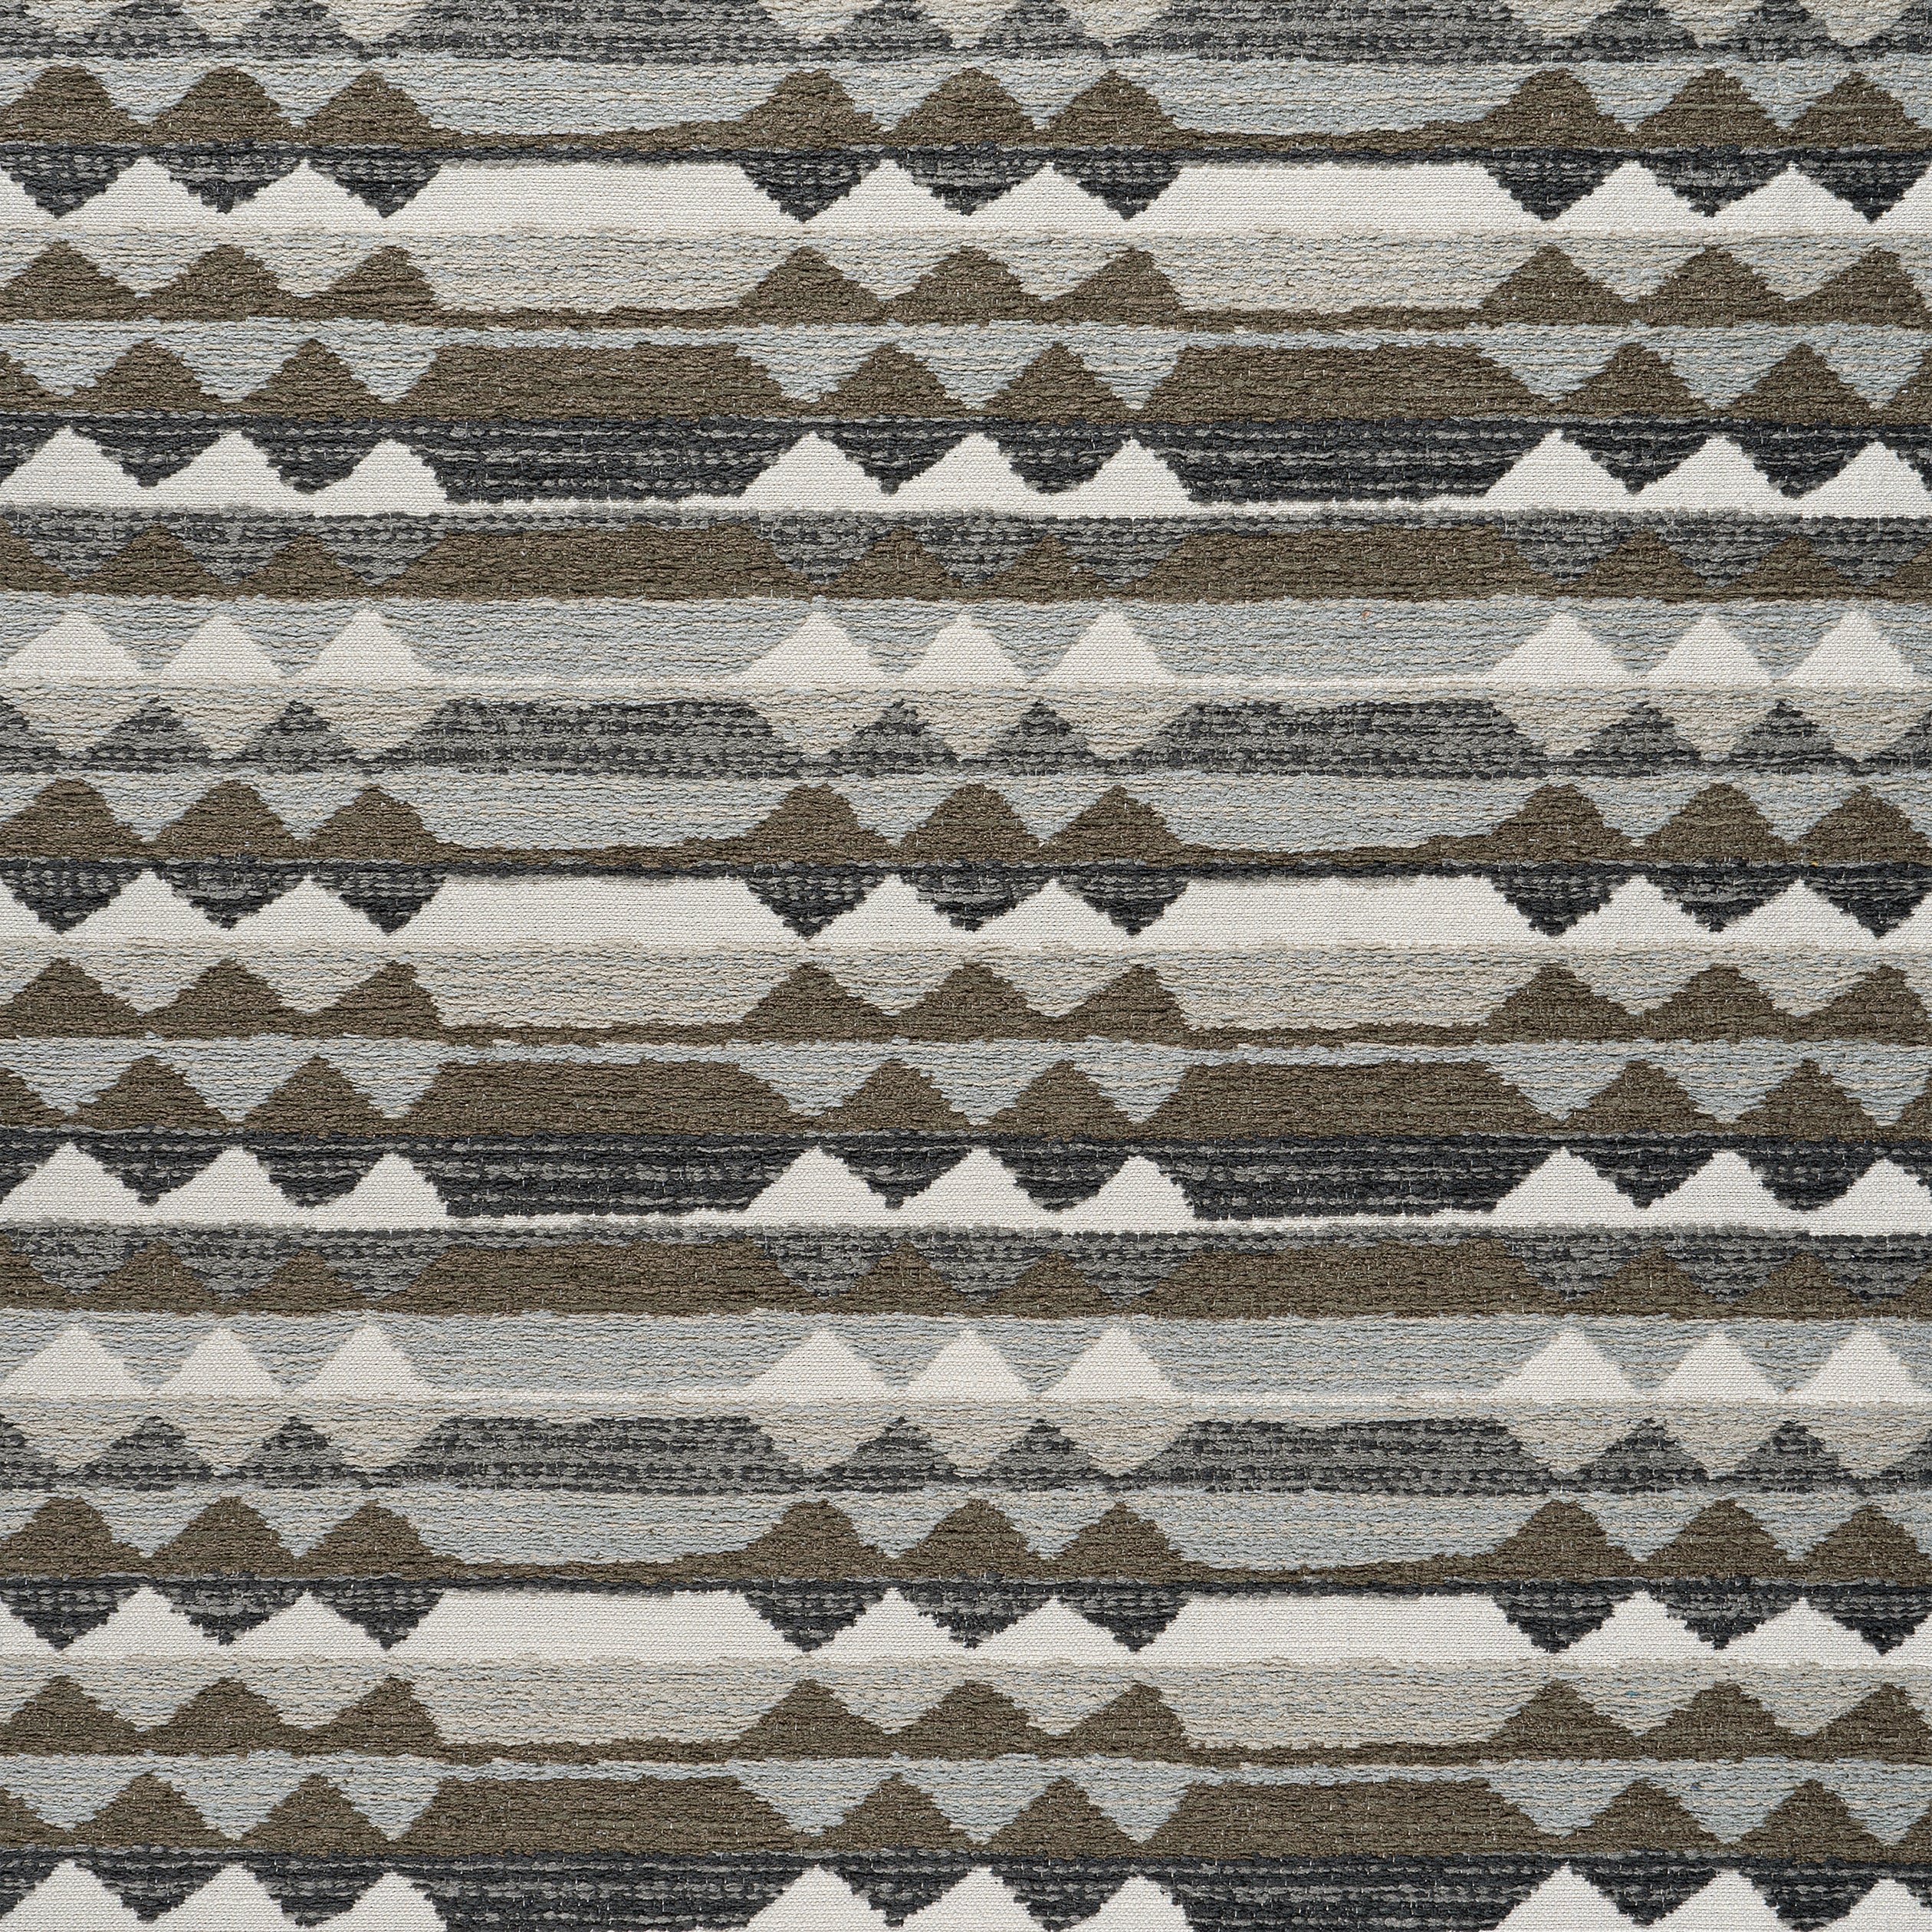 Saranac fabric in hickory color - pattern number W78375 - by Thibaut in the  Sierra collection